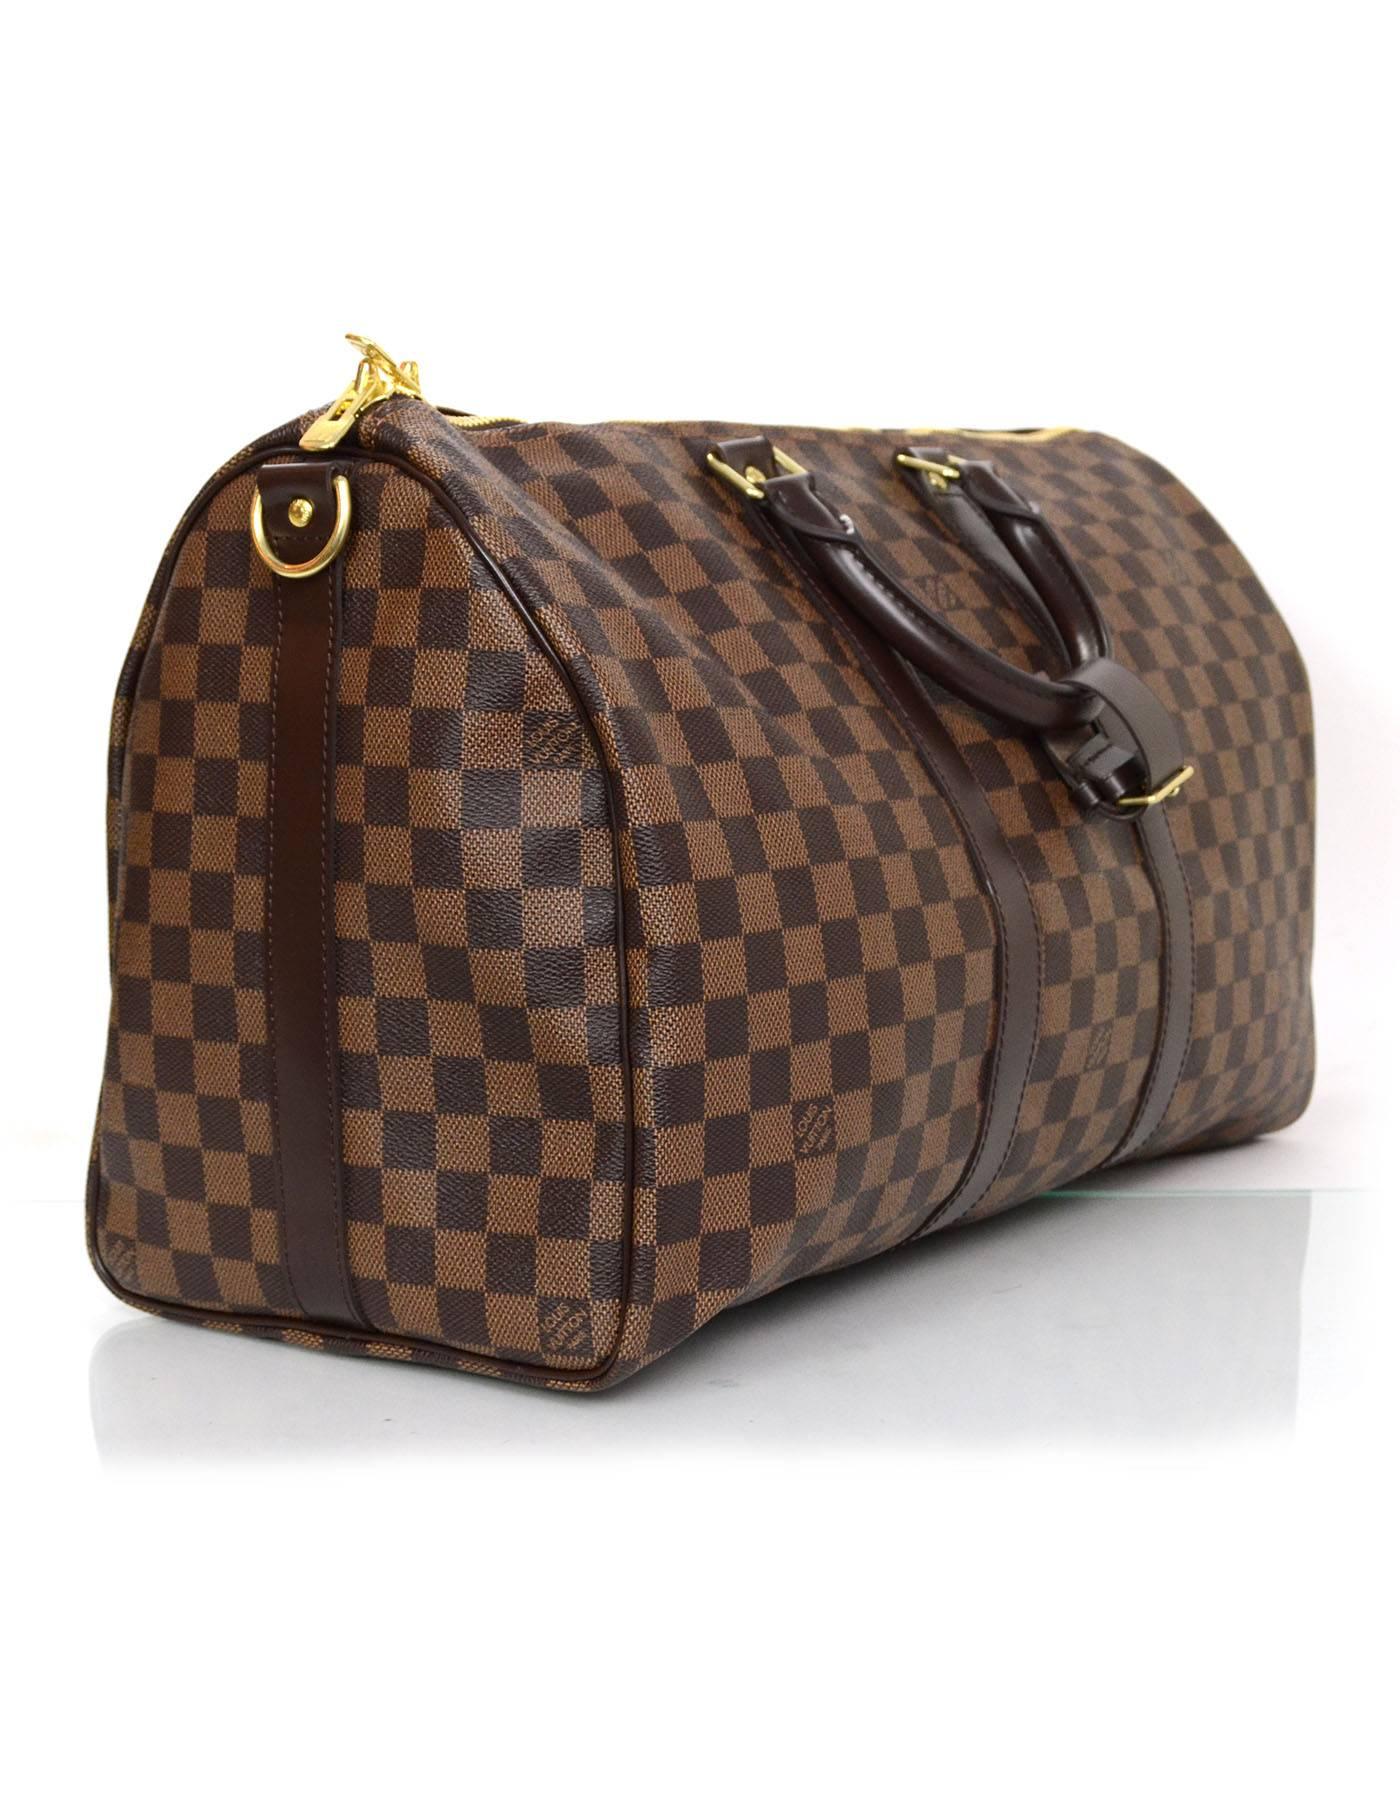 Louis Vuitton Damier Keepall Bandouliere 45
Features optional shoulder/crossbody strap

Made In: France
Year of Production: 2015
Color: Brown and tan
Hardware: Goldtone
Materials: Coated canvas and leather
Lining: Brown